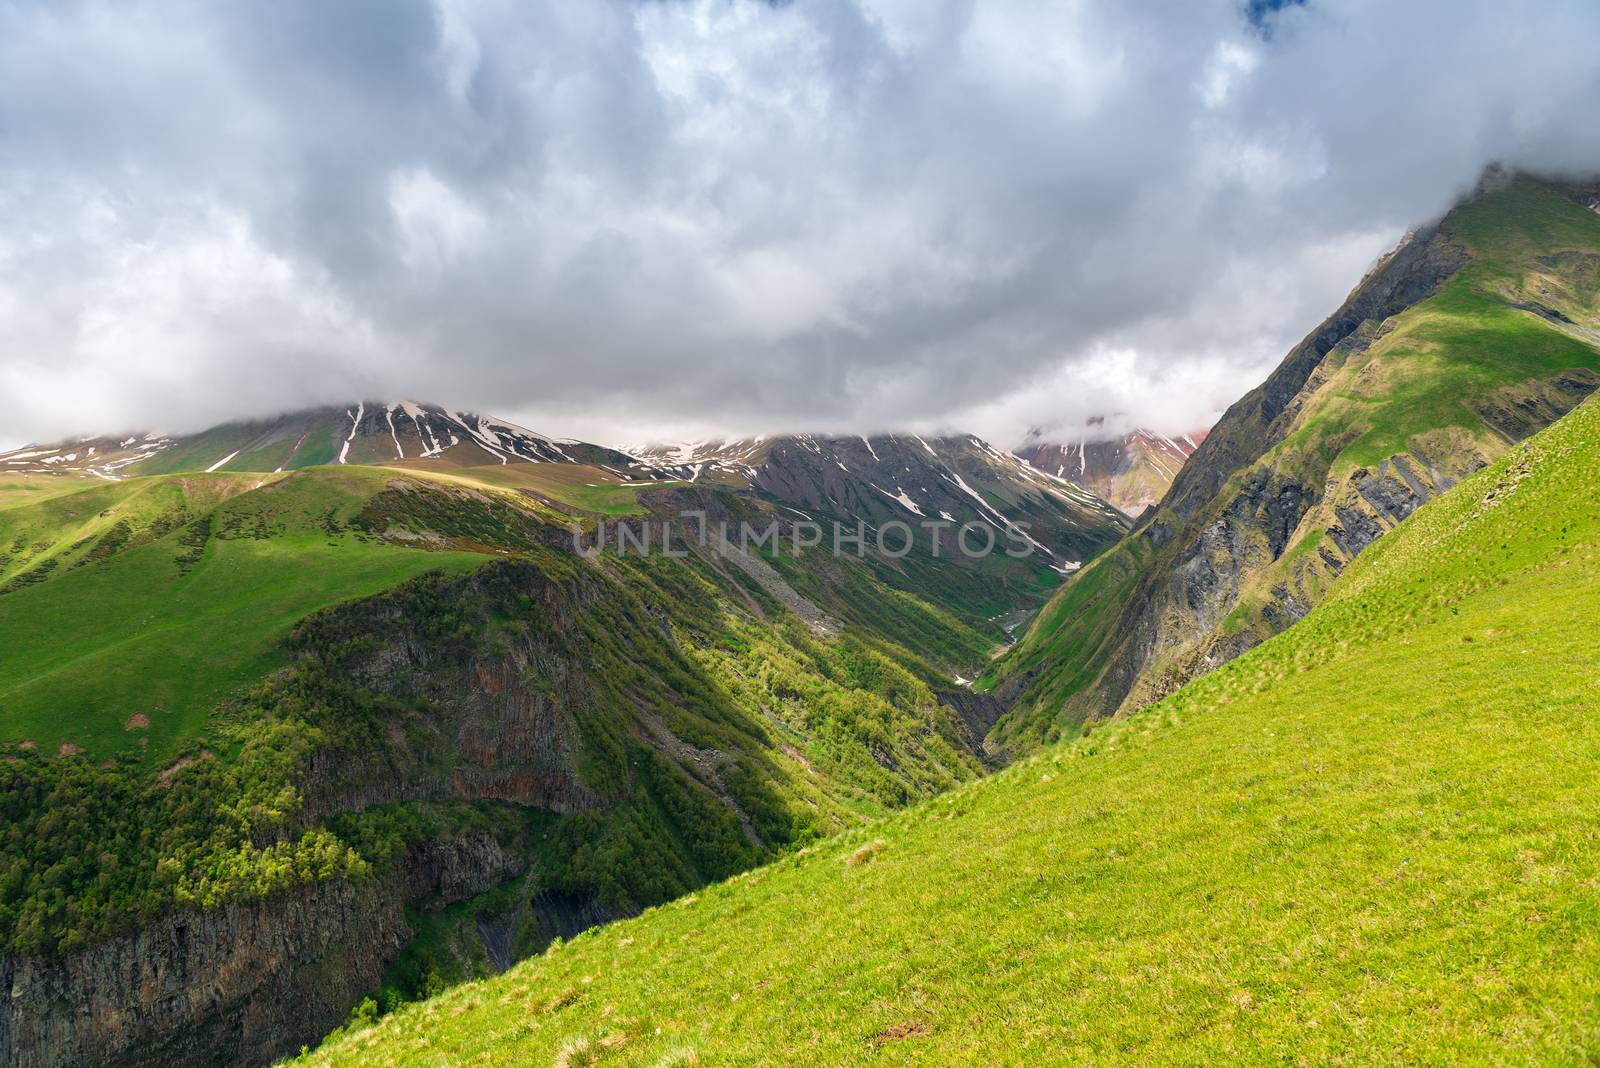 The picturesque gorge in the high Caucasus mountains, Georgia in summer